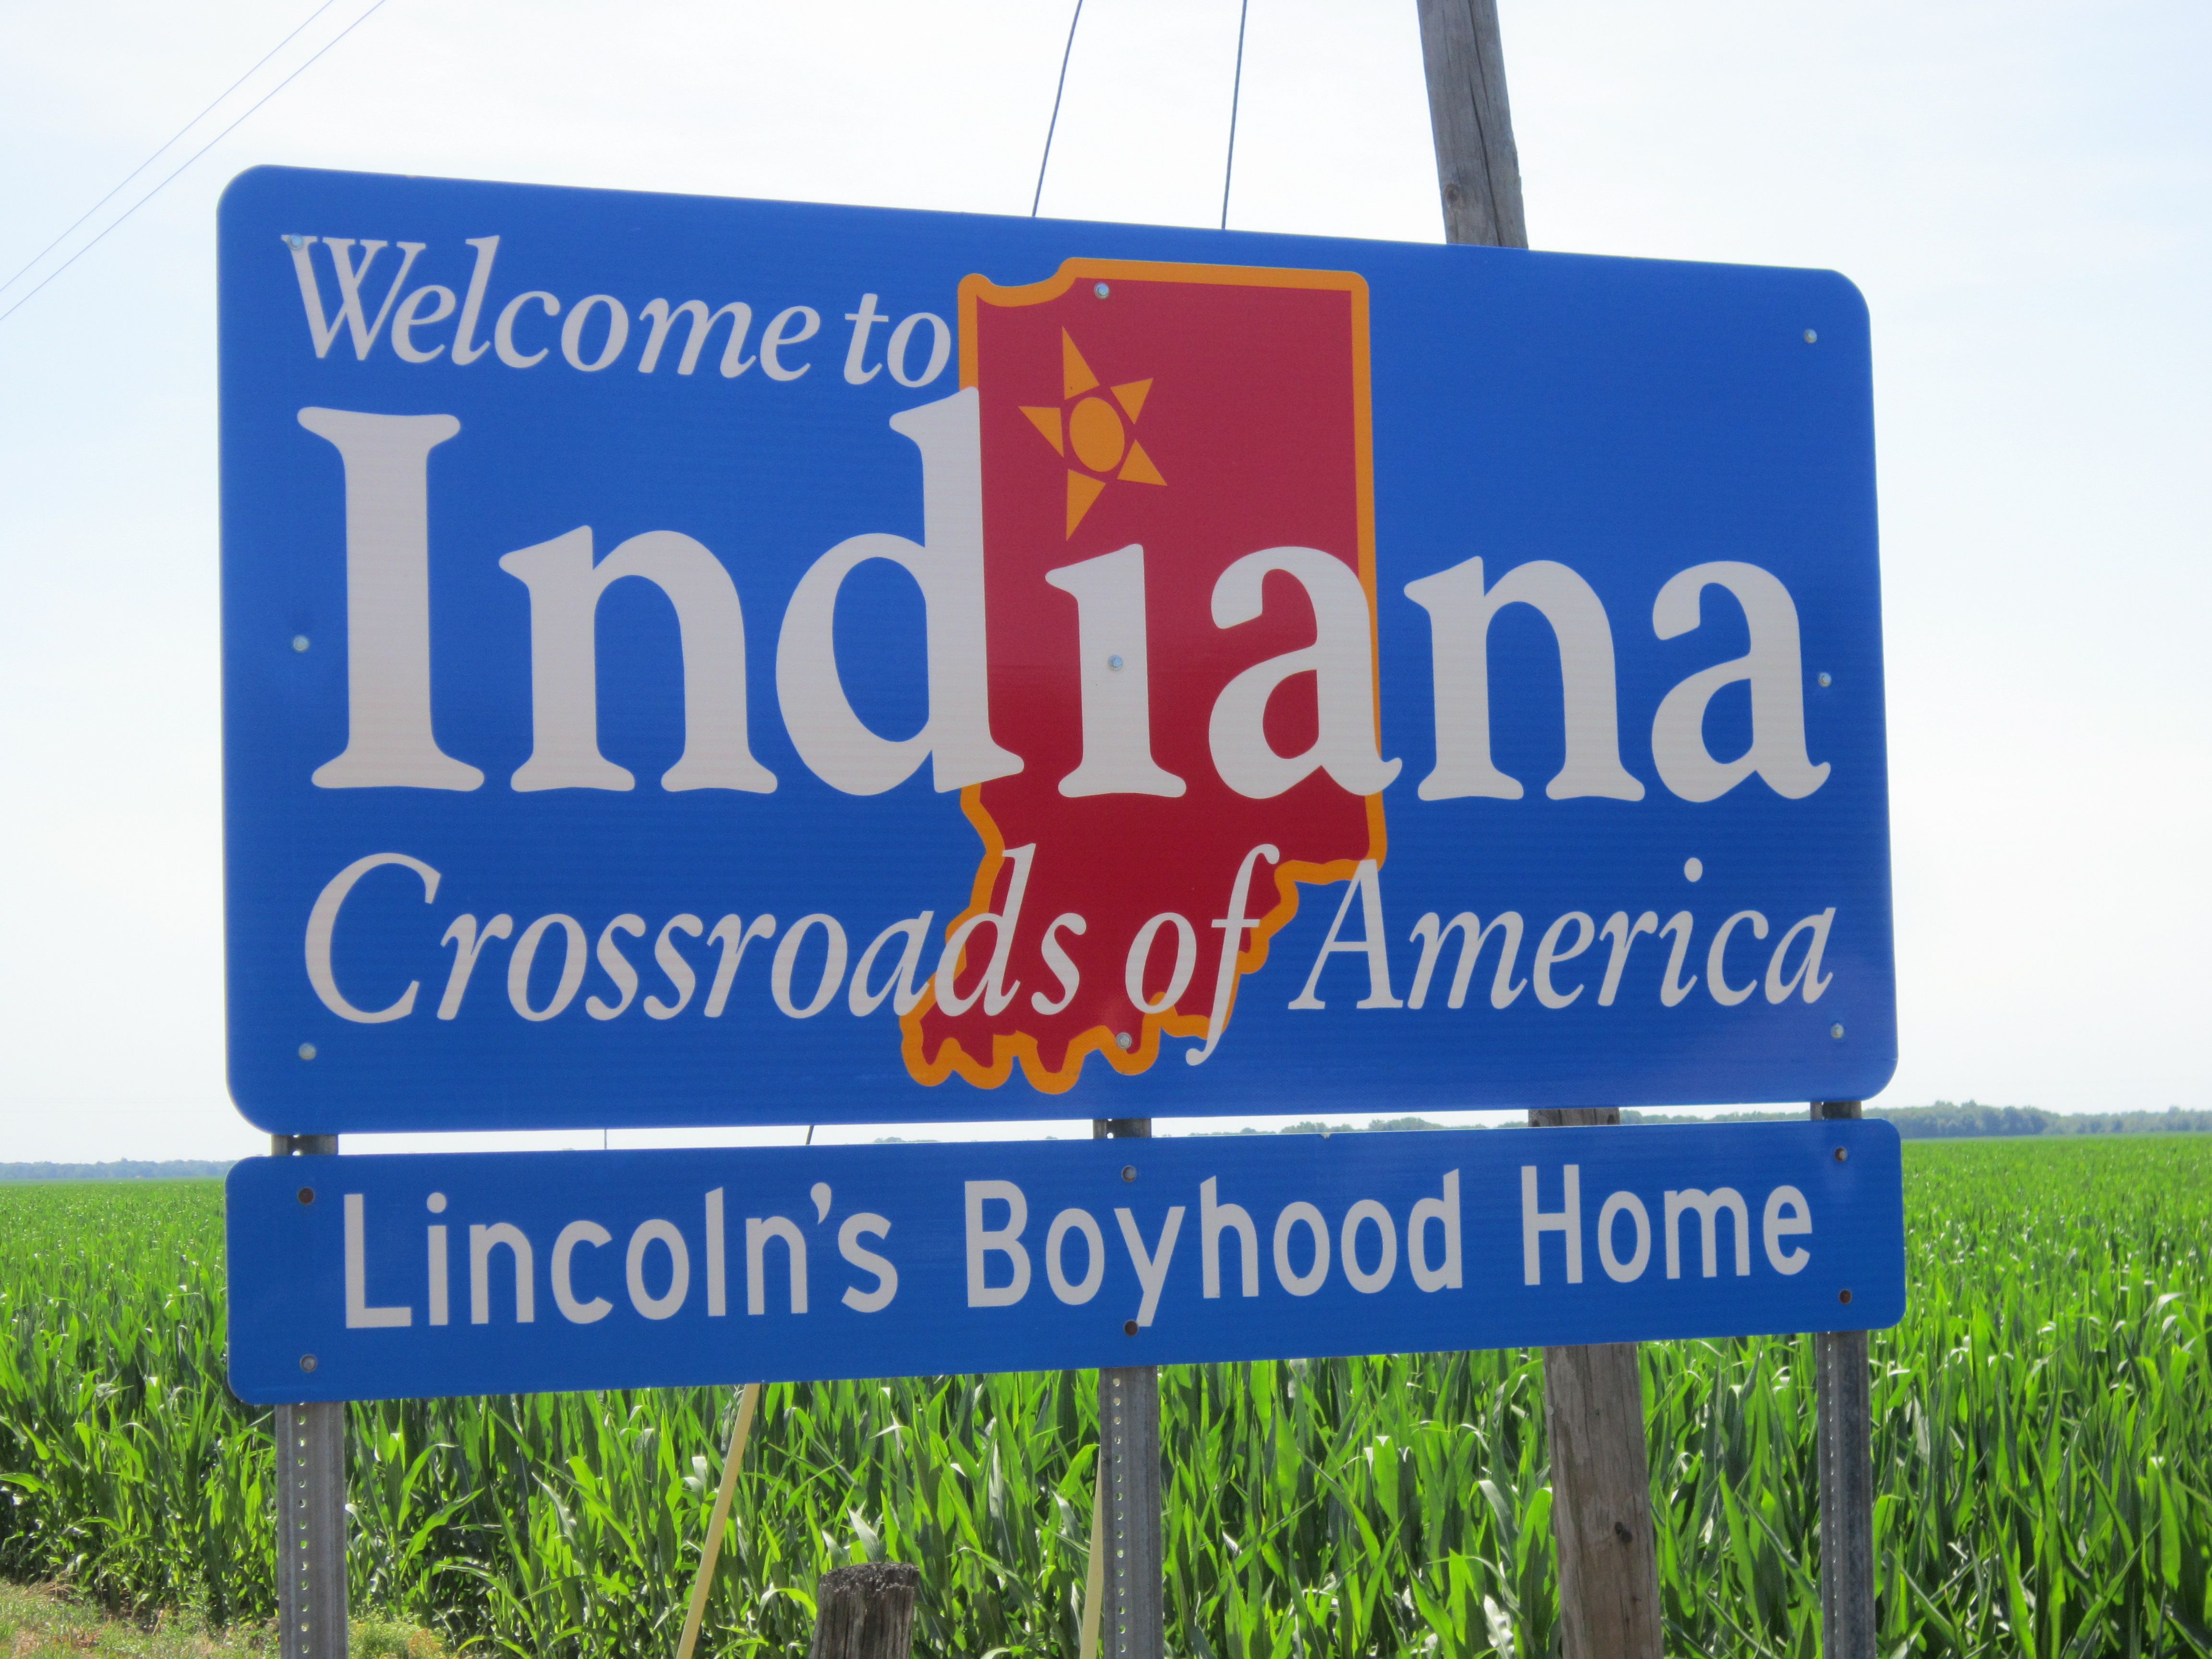 Indiana Road Sign on side of a road in a field, text on sign: Welcome to Indiana, crossroads of America, Lincoln's boyhood home